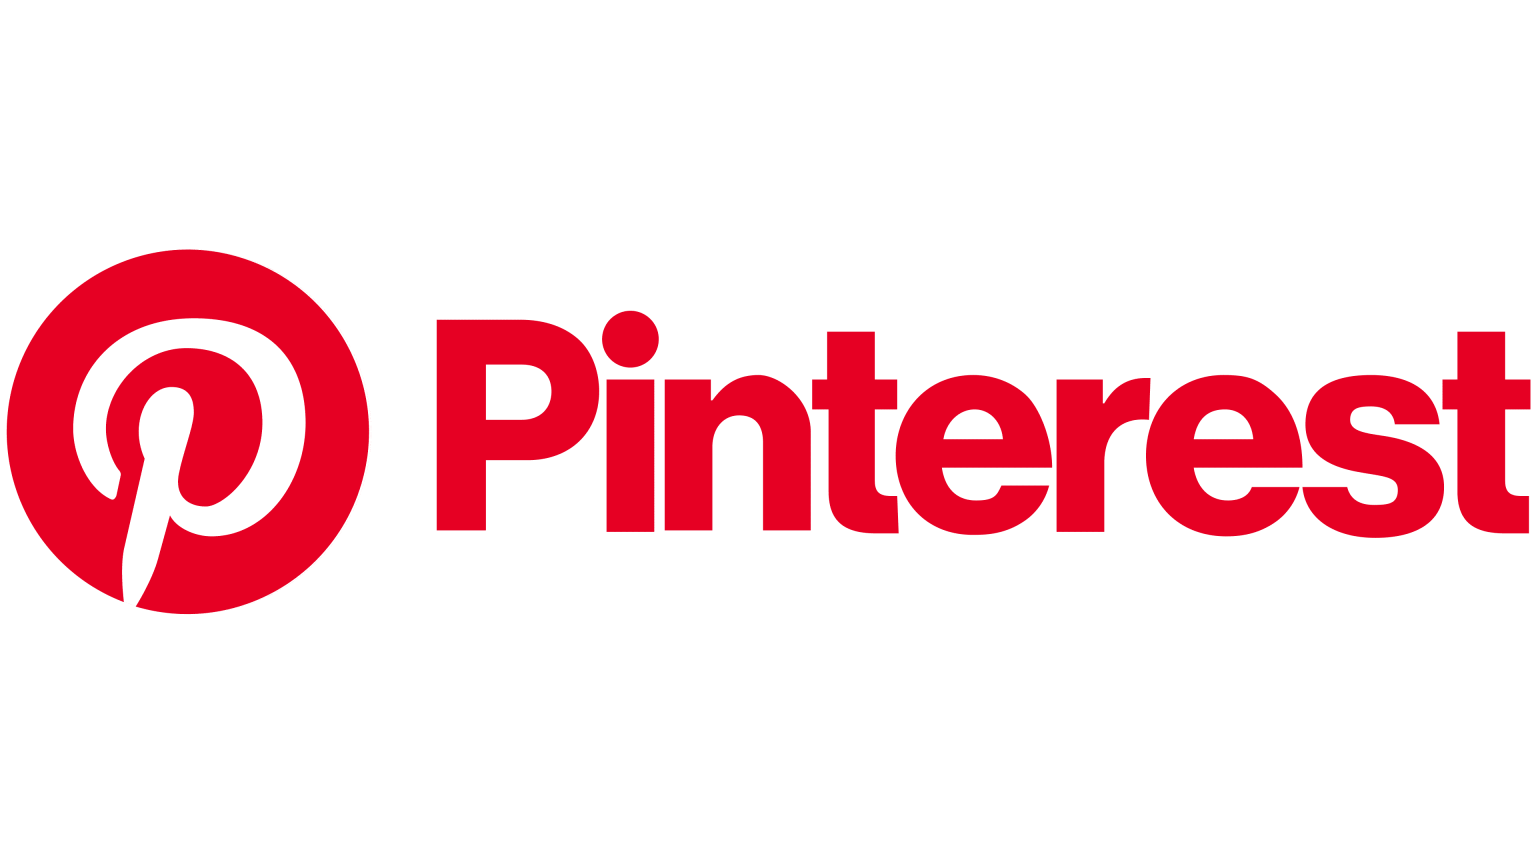 Sources: Microsoft Made An Offer To Acquire Pinterest In Recent Months; Talks Are Not Active Right Now (Financial Times)